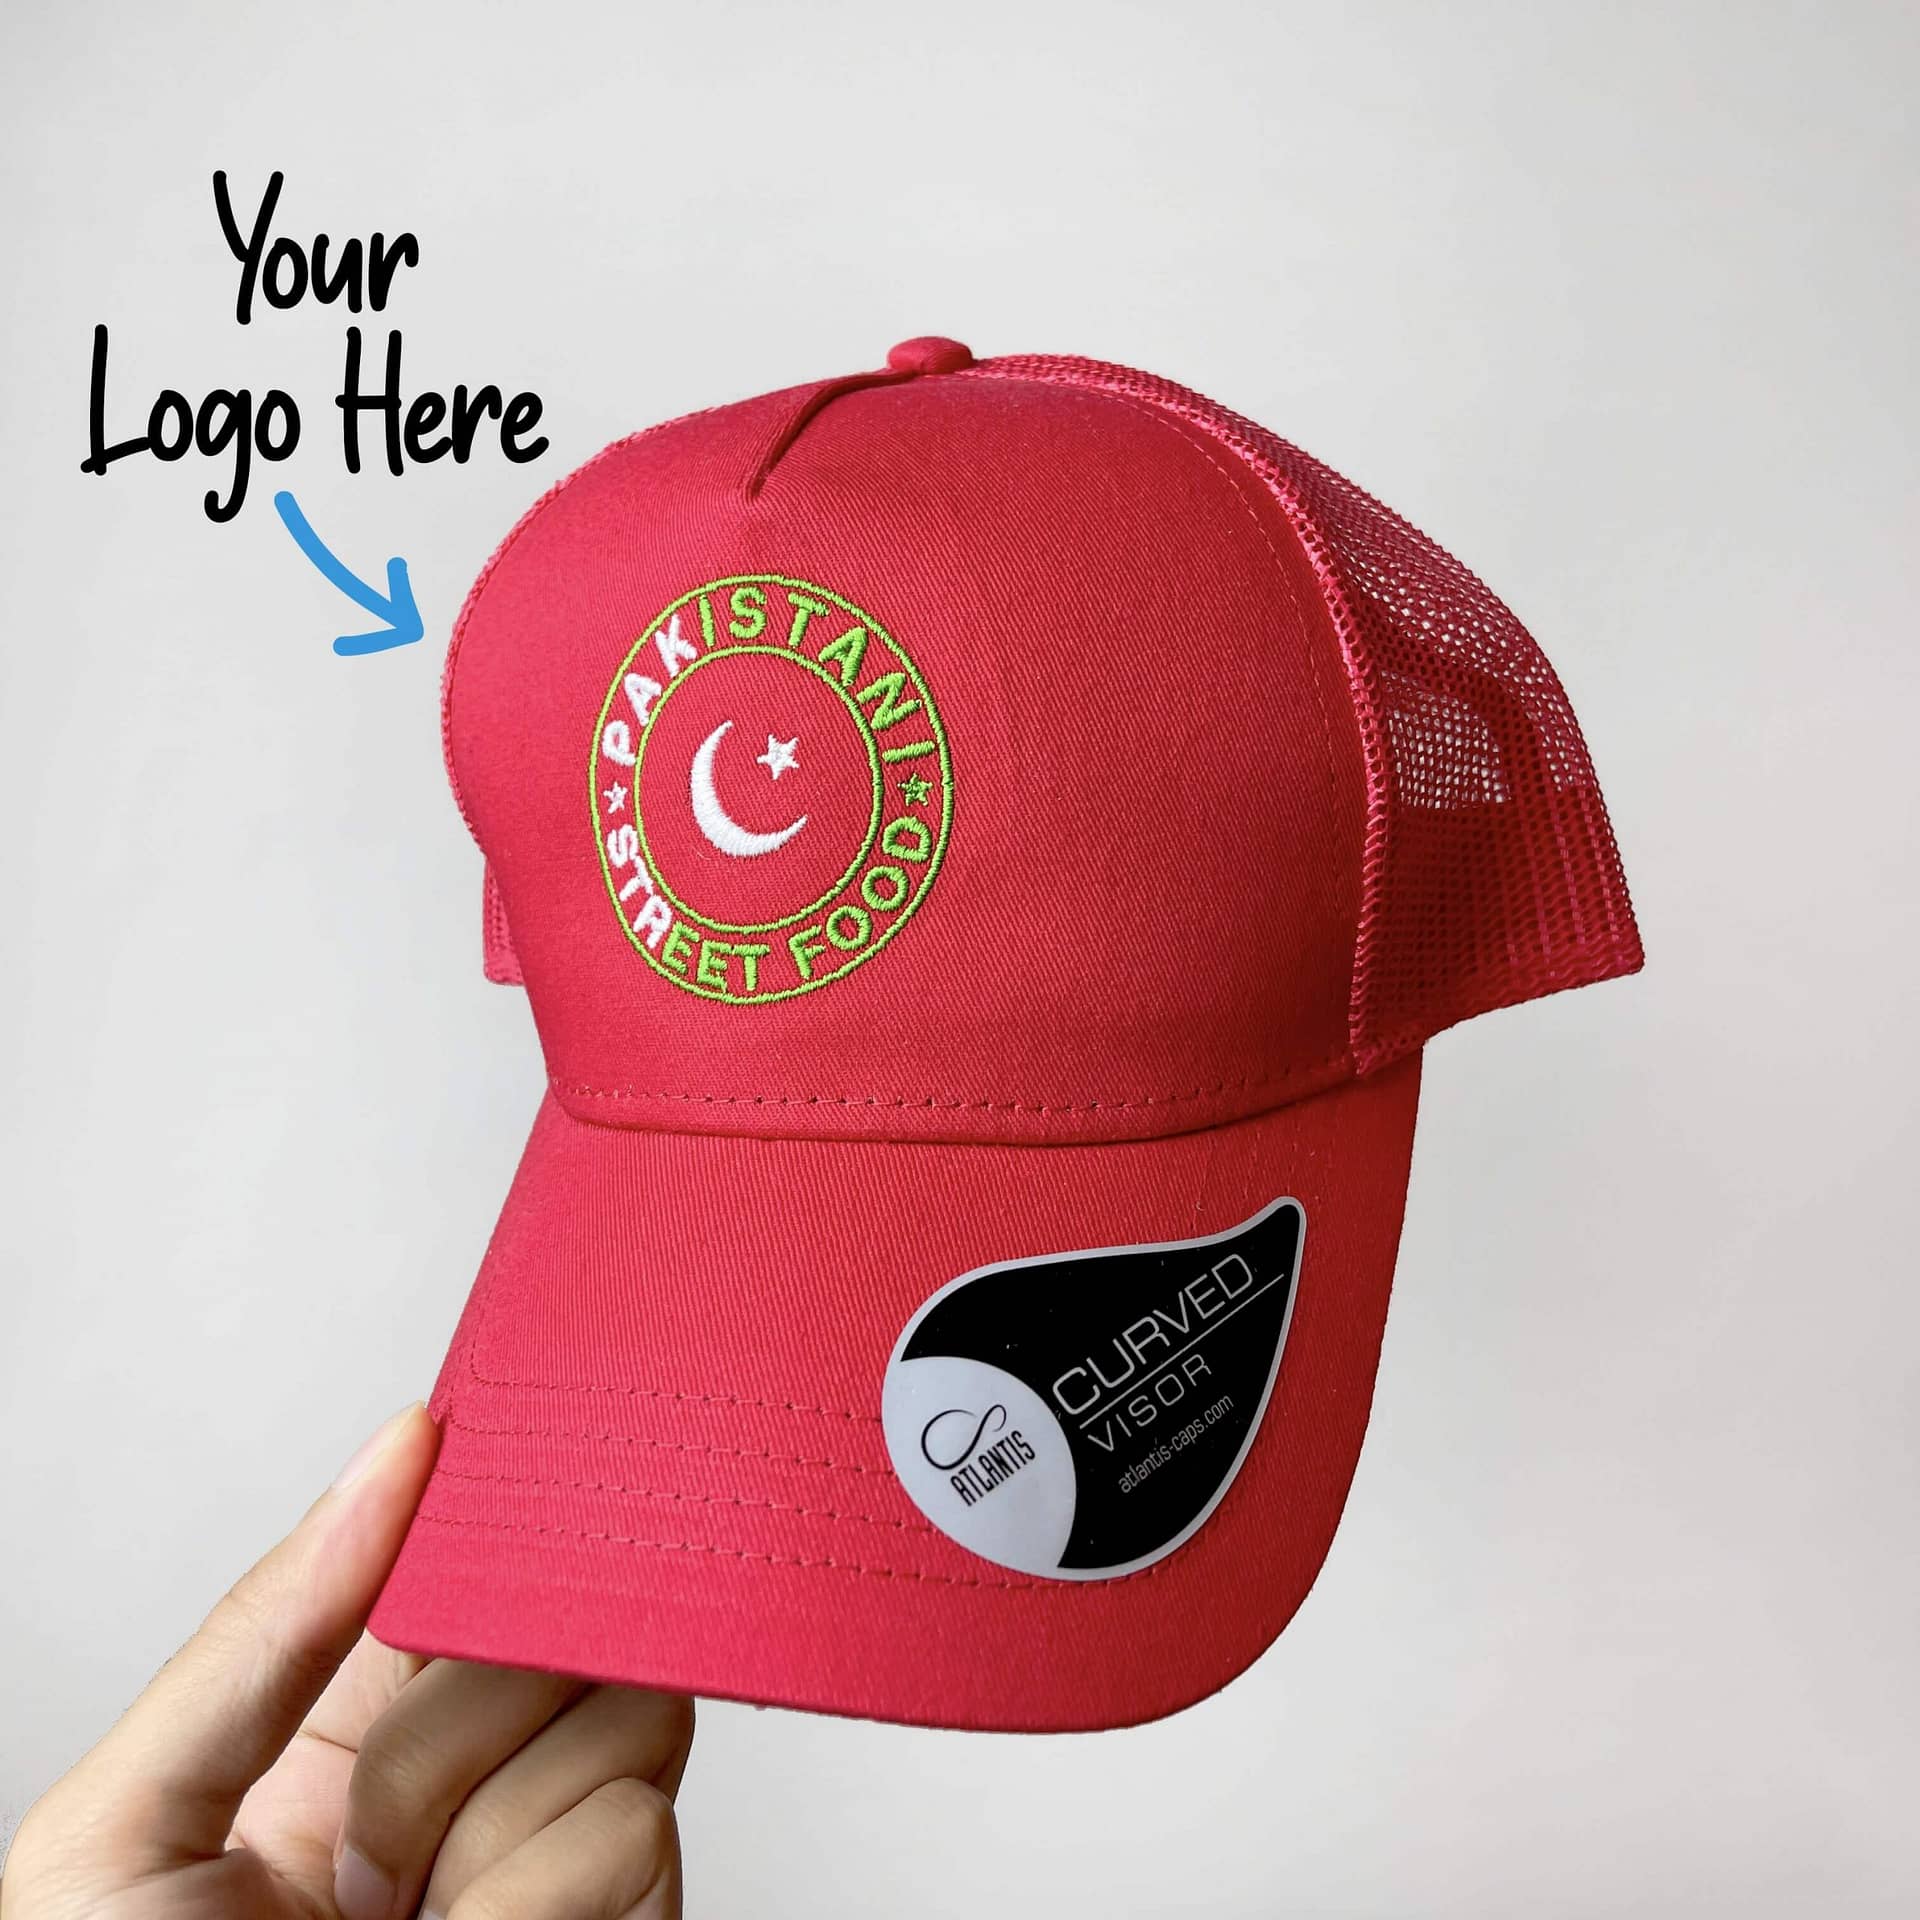 Custom Personalised Hat/Cap Embroidery | OneClickPrinter